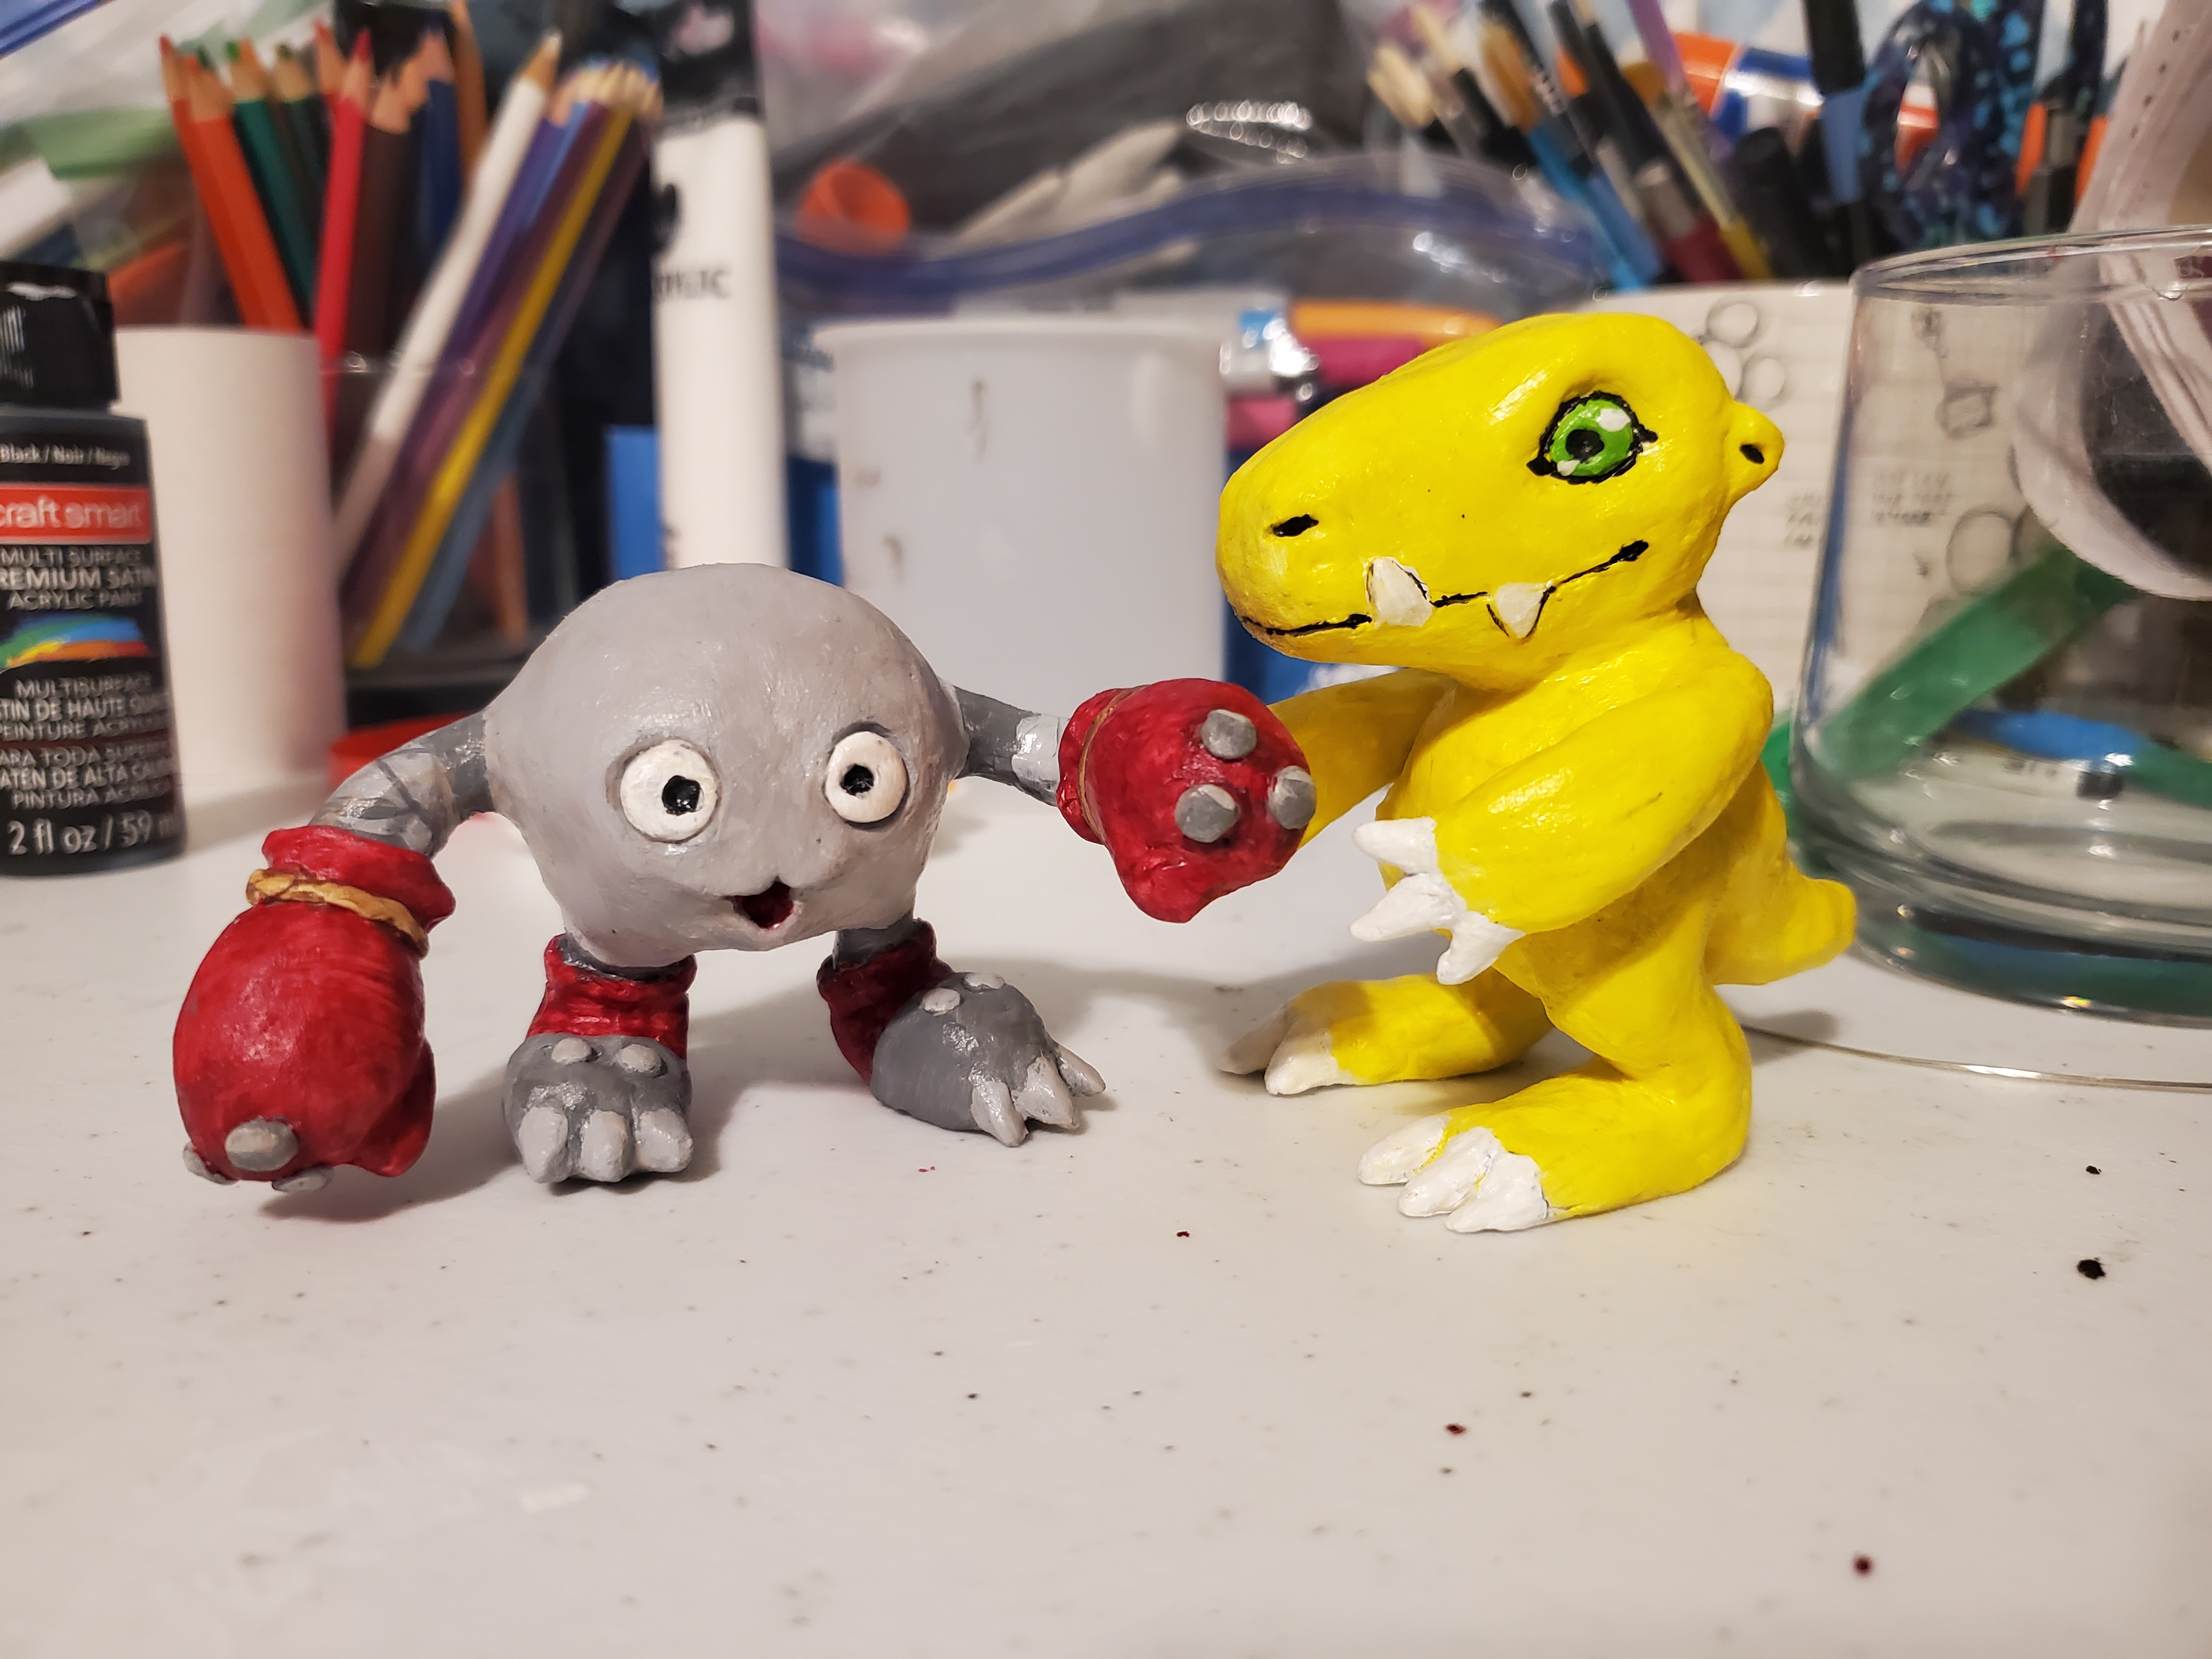 A pair of clay figures of Mamemon and Agumon from Digimon